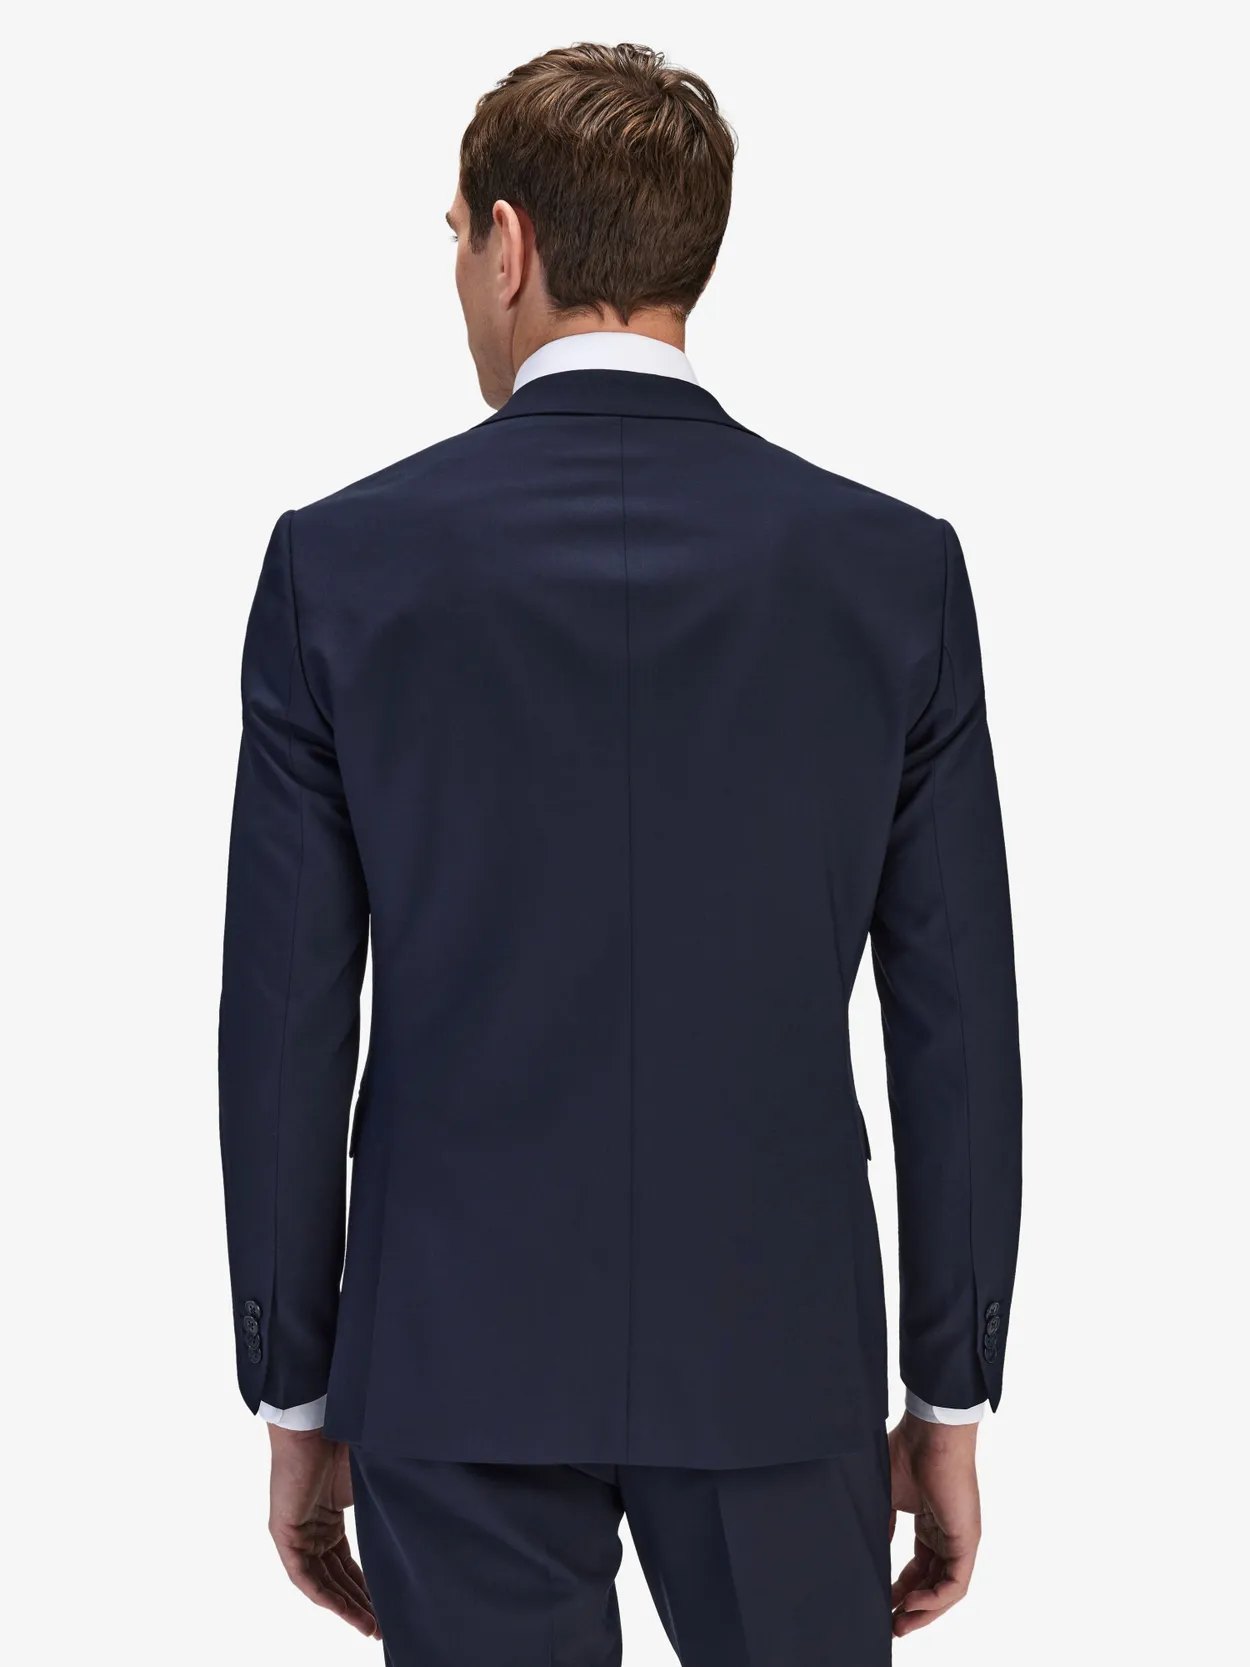 Image number 6 for product Blue Suit & Shirt